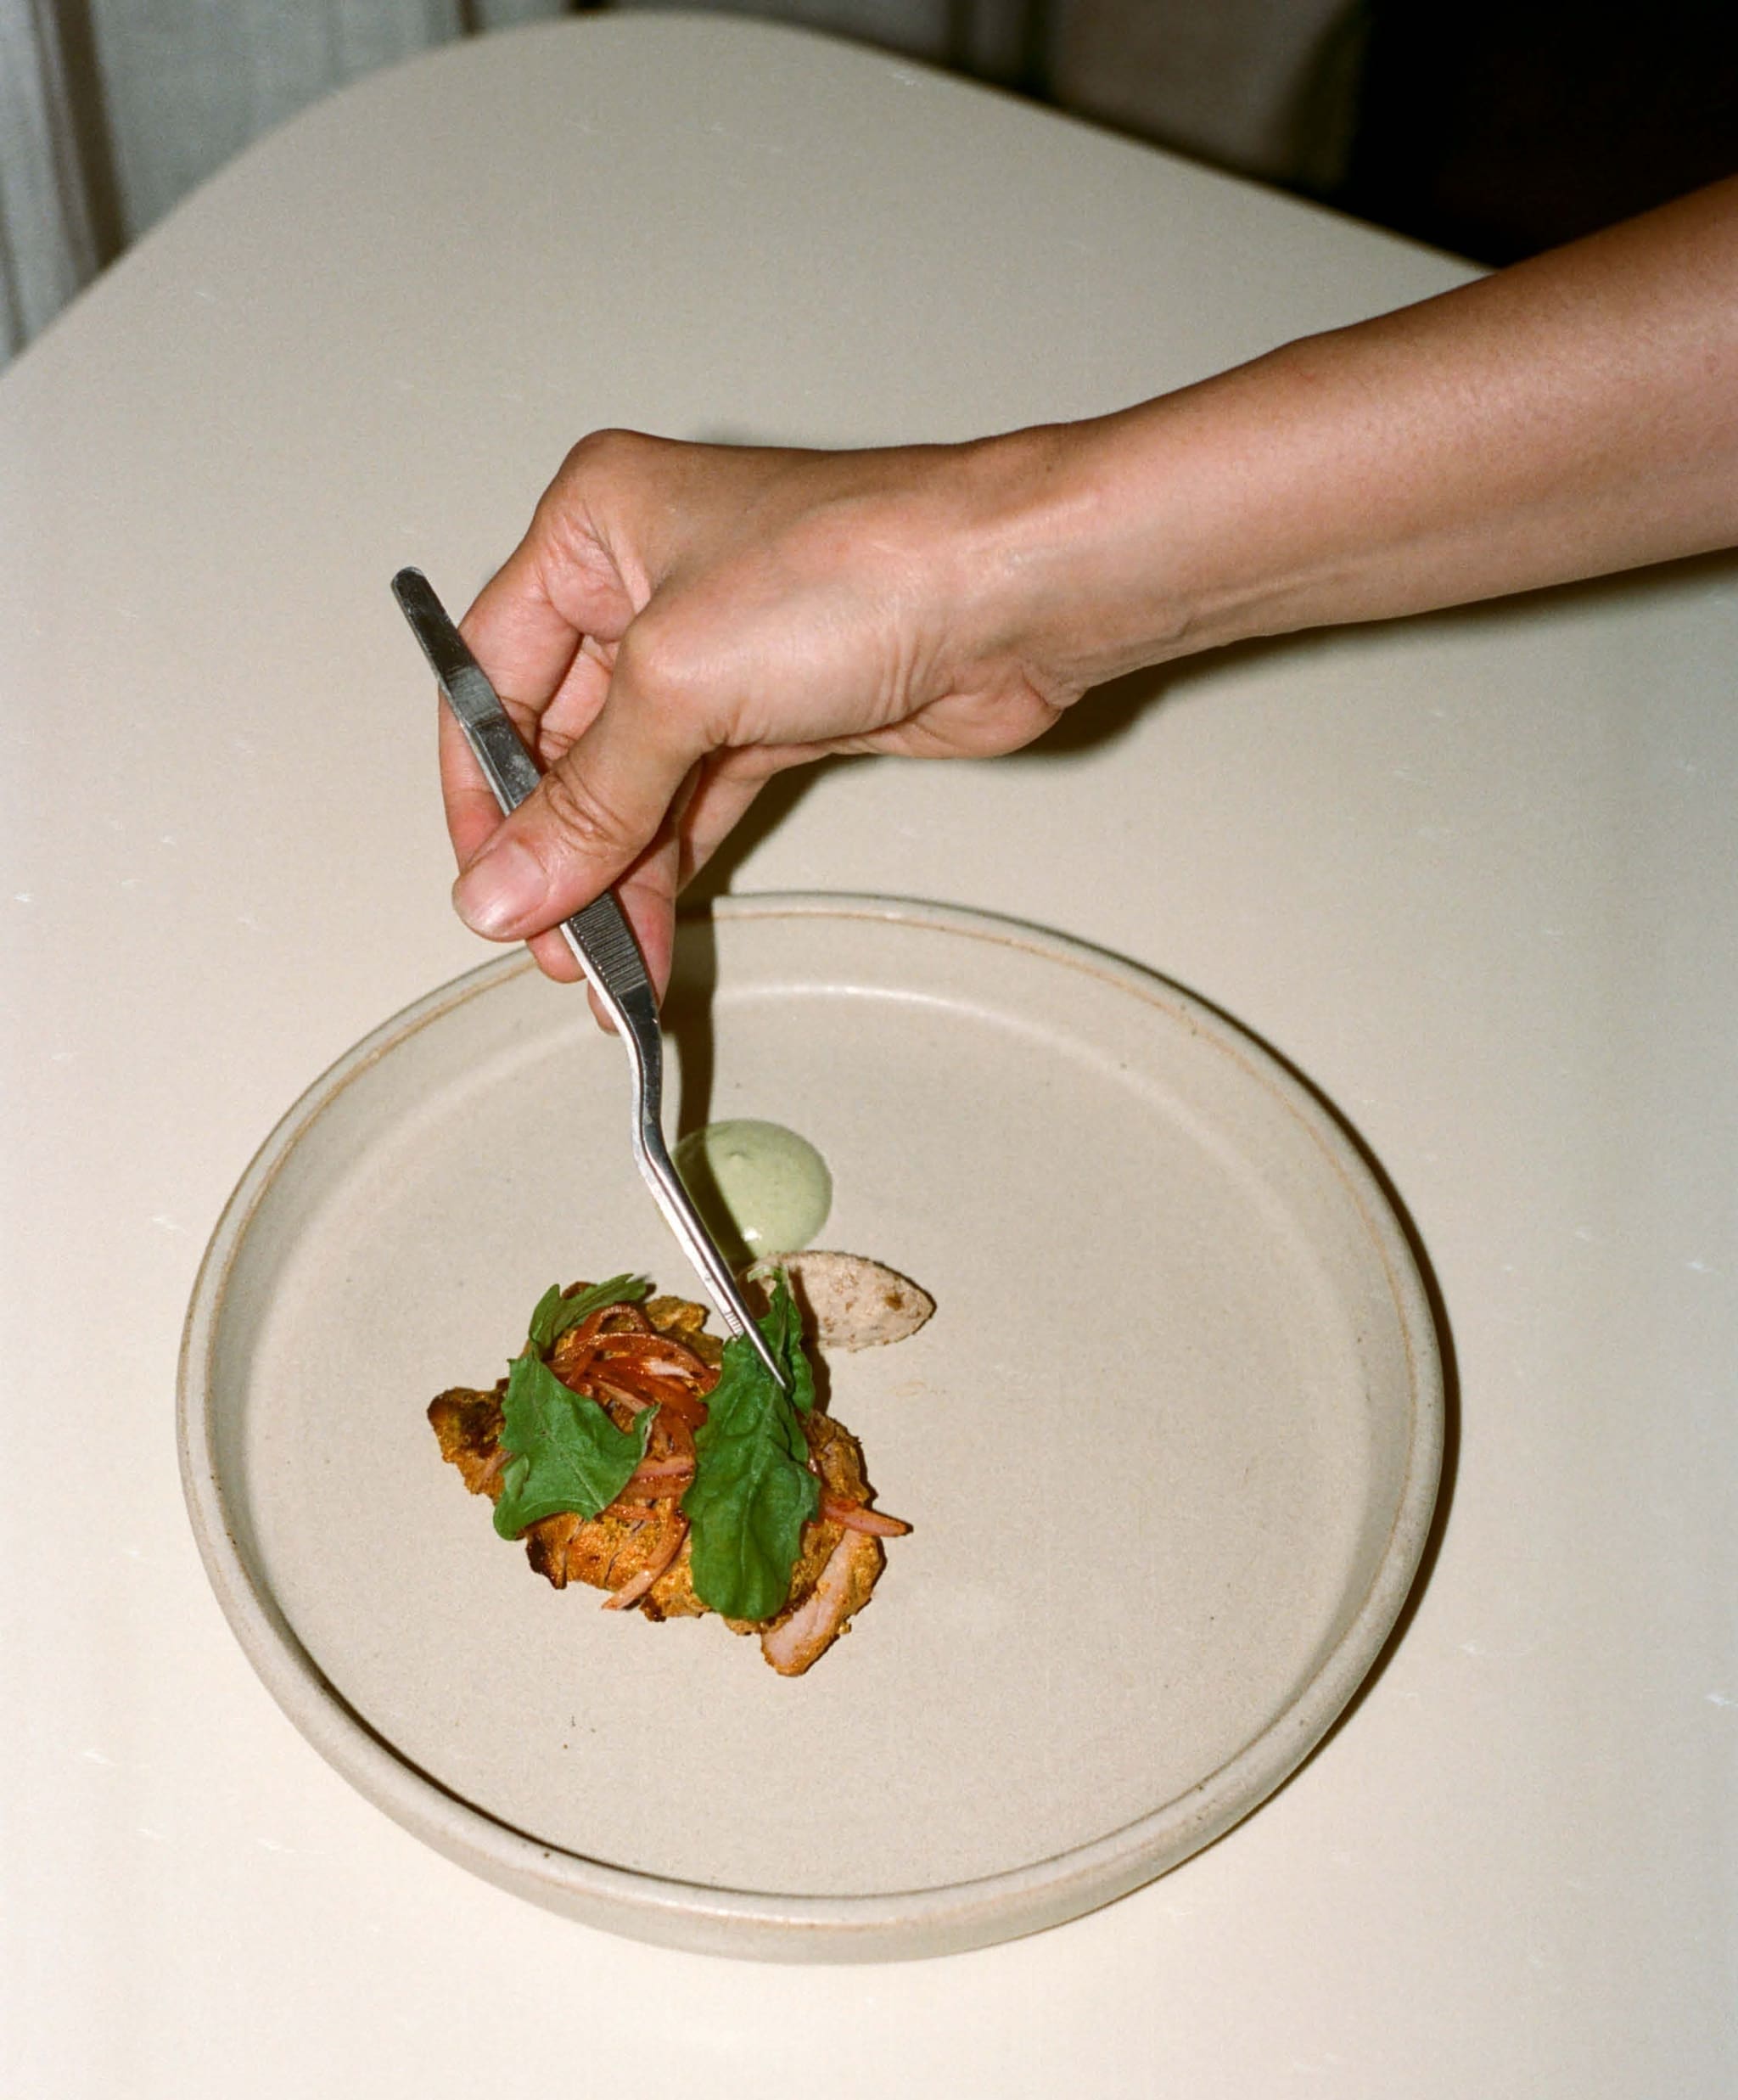 Plating up food on a white plate at Noon.